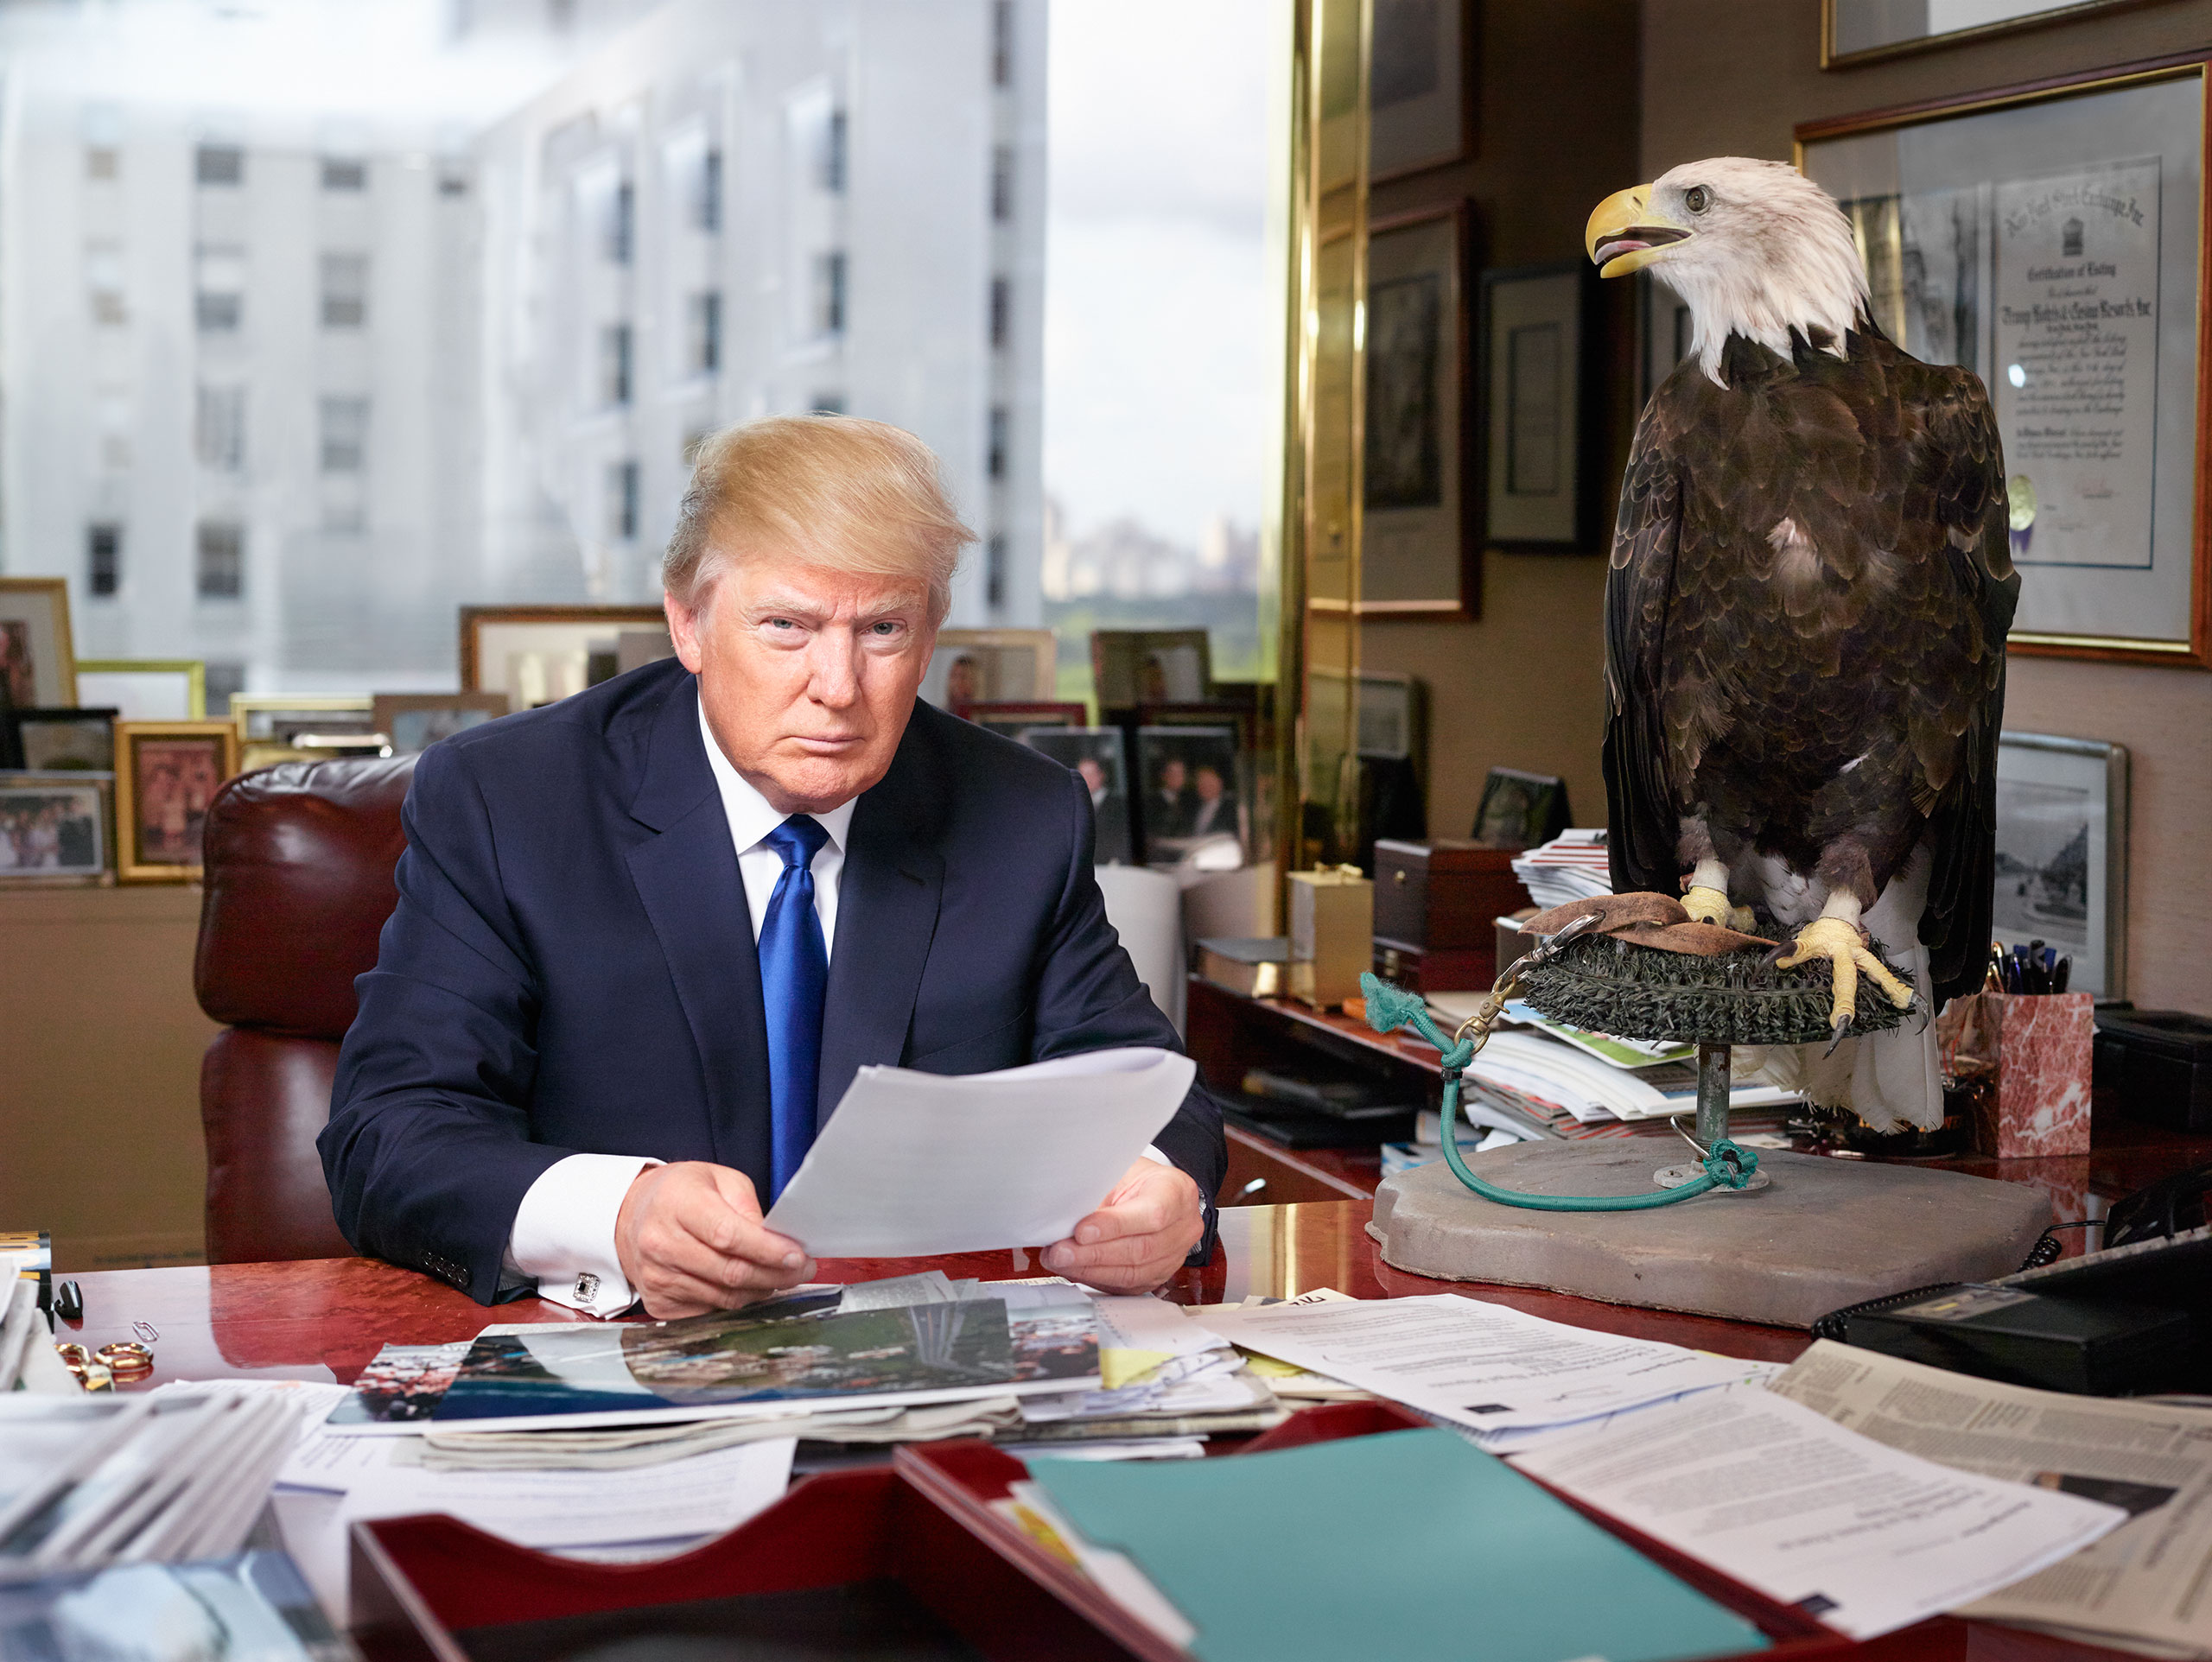 The Republican front runner in his corner office on the 25th floor of Trump Tower in New York City, photographed with a bald eagle named Uncle Sam. From  The Donald Has Landed.  August 31, 2015 issue.